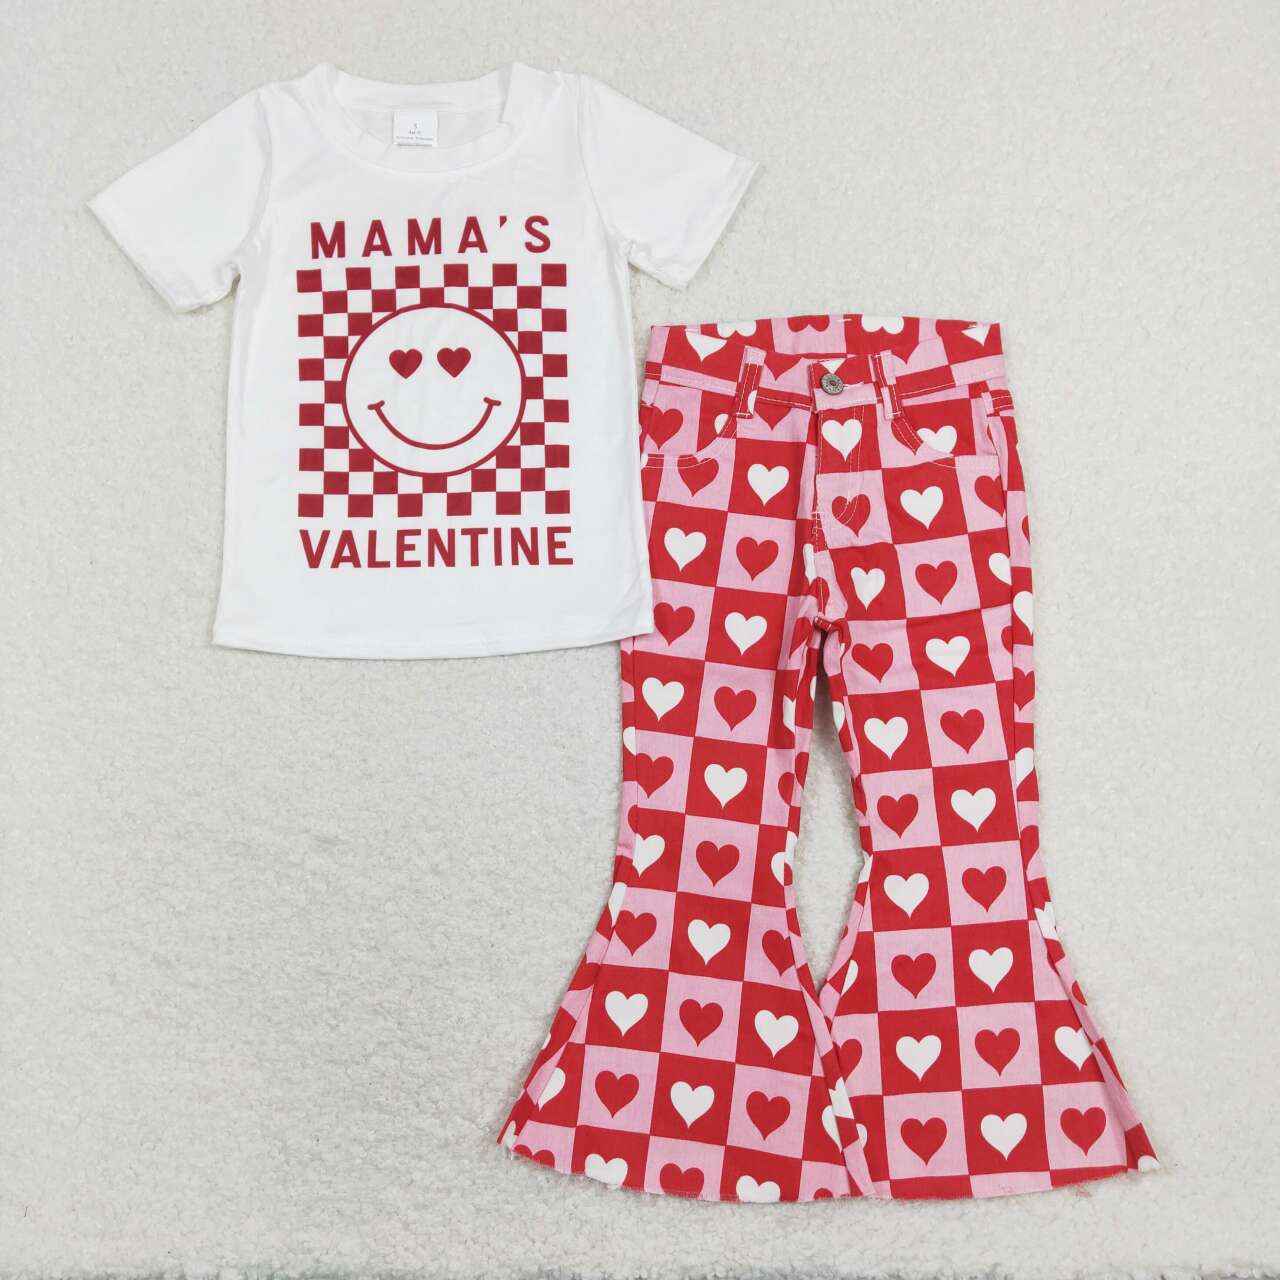 mams valentines shirt jeans bell bottoms outfit